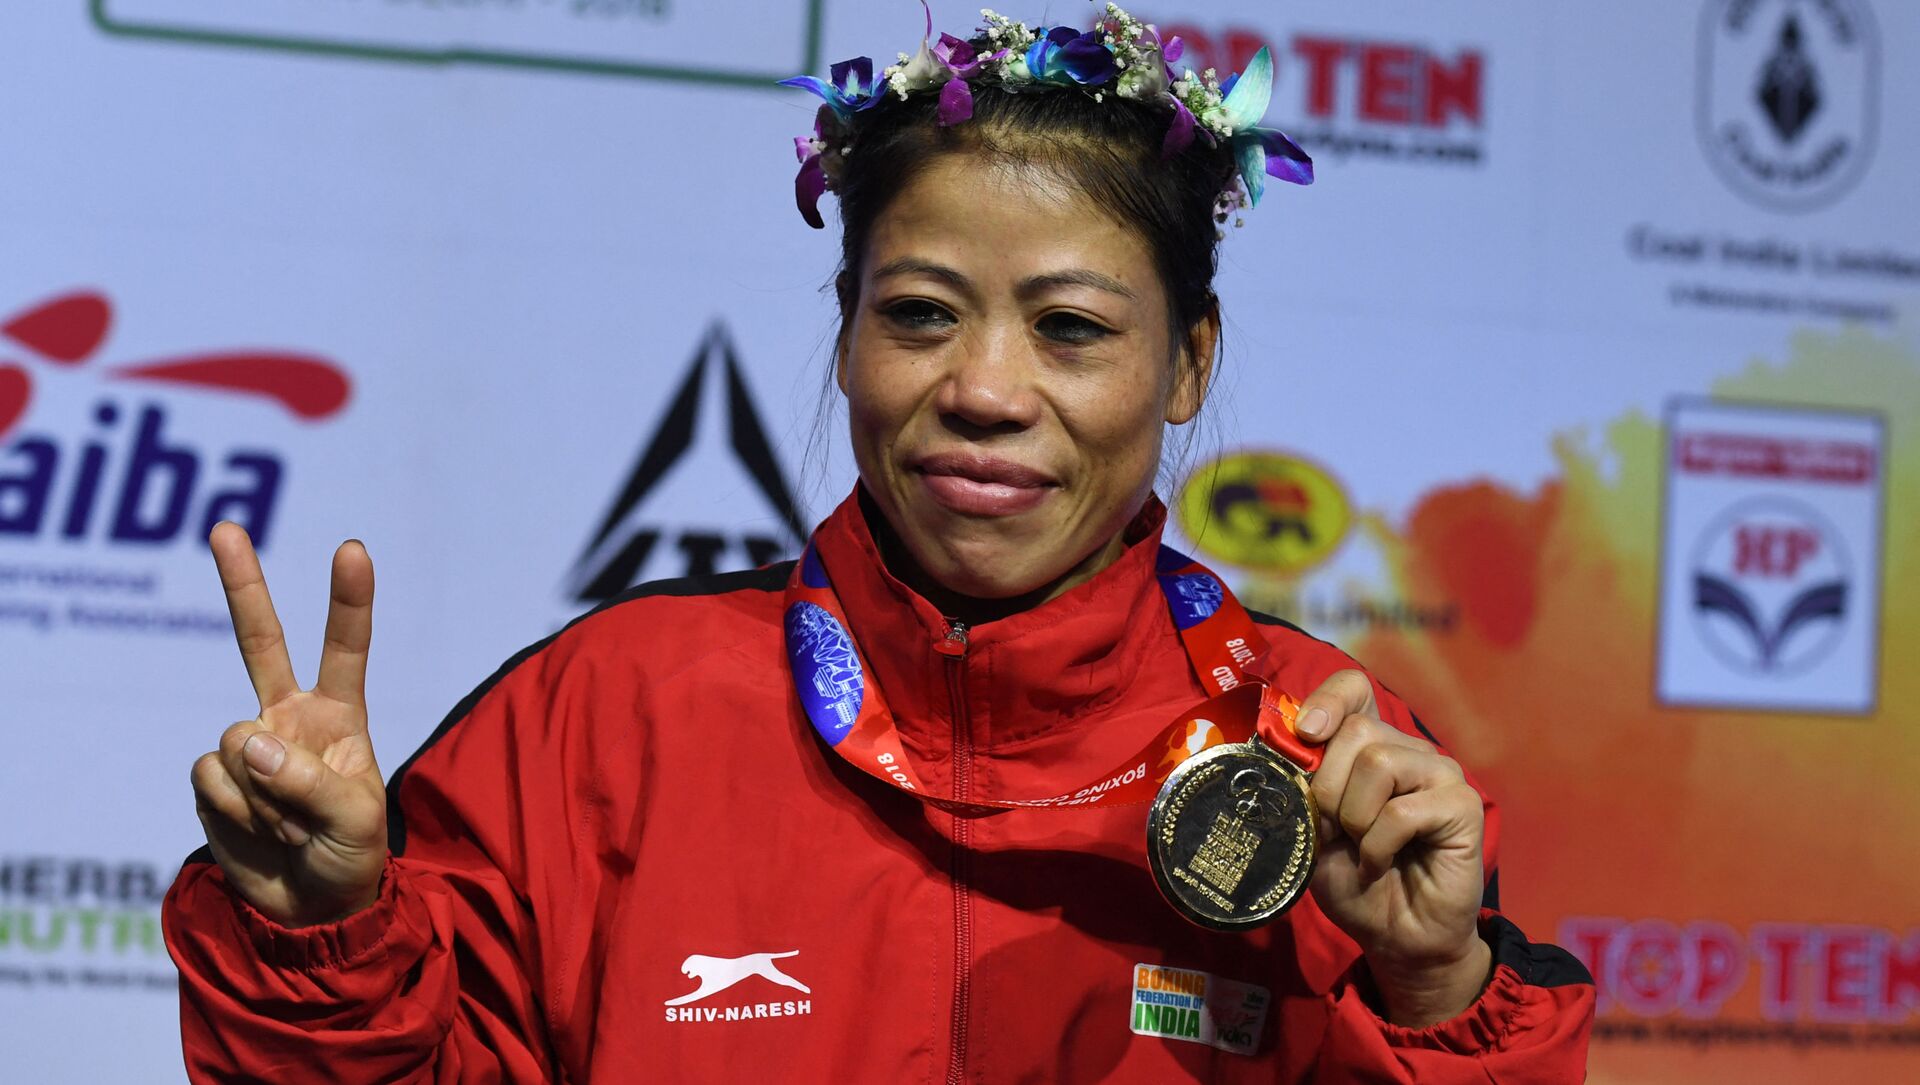 Mary Kom of India gestures with her gold medal after winning the 45-48 kg category final fight at the 2018 AIBA Women's World Boxing Championships in New Delhi on November 24, 2018 - Sputnik International, 1920, 14.07.2021